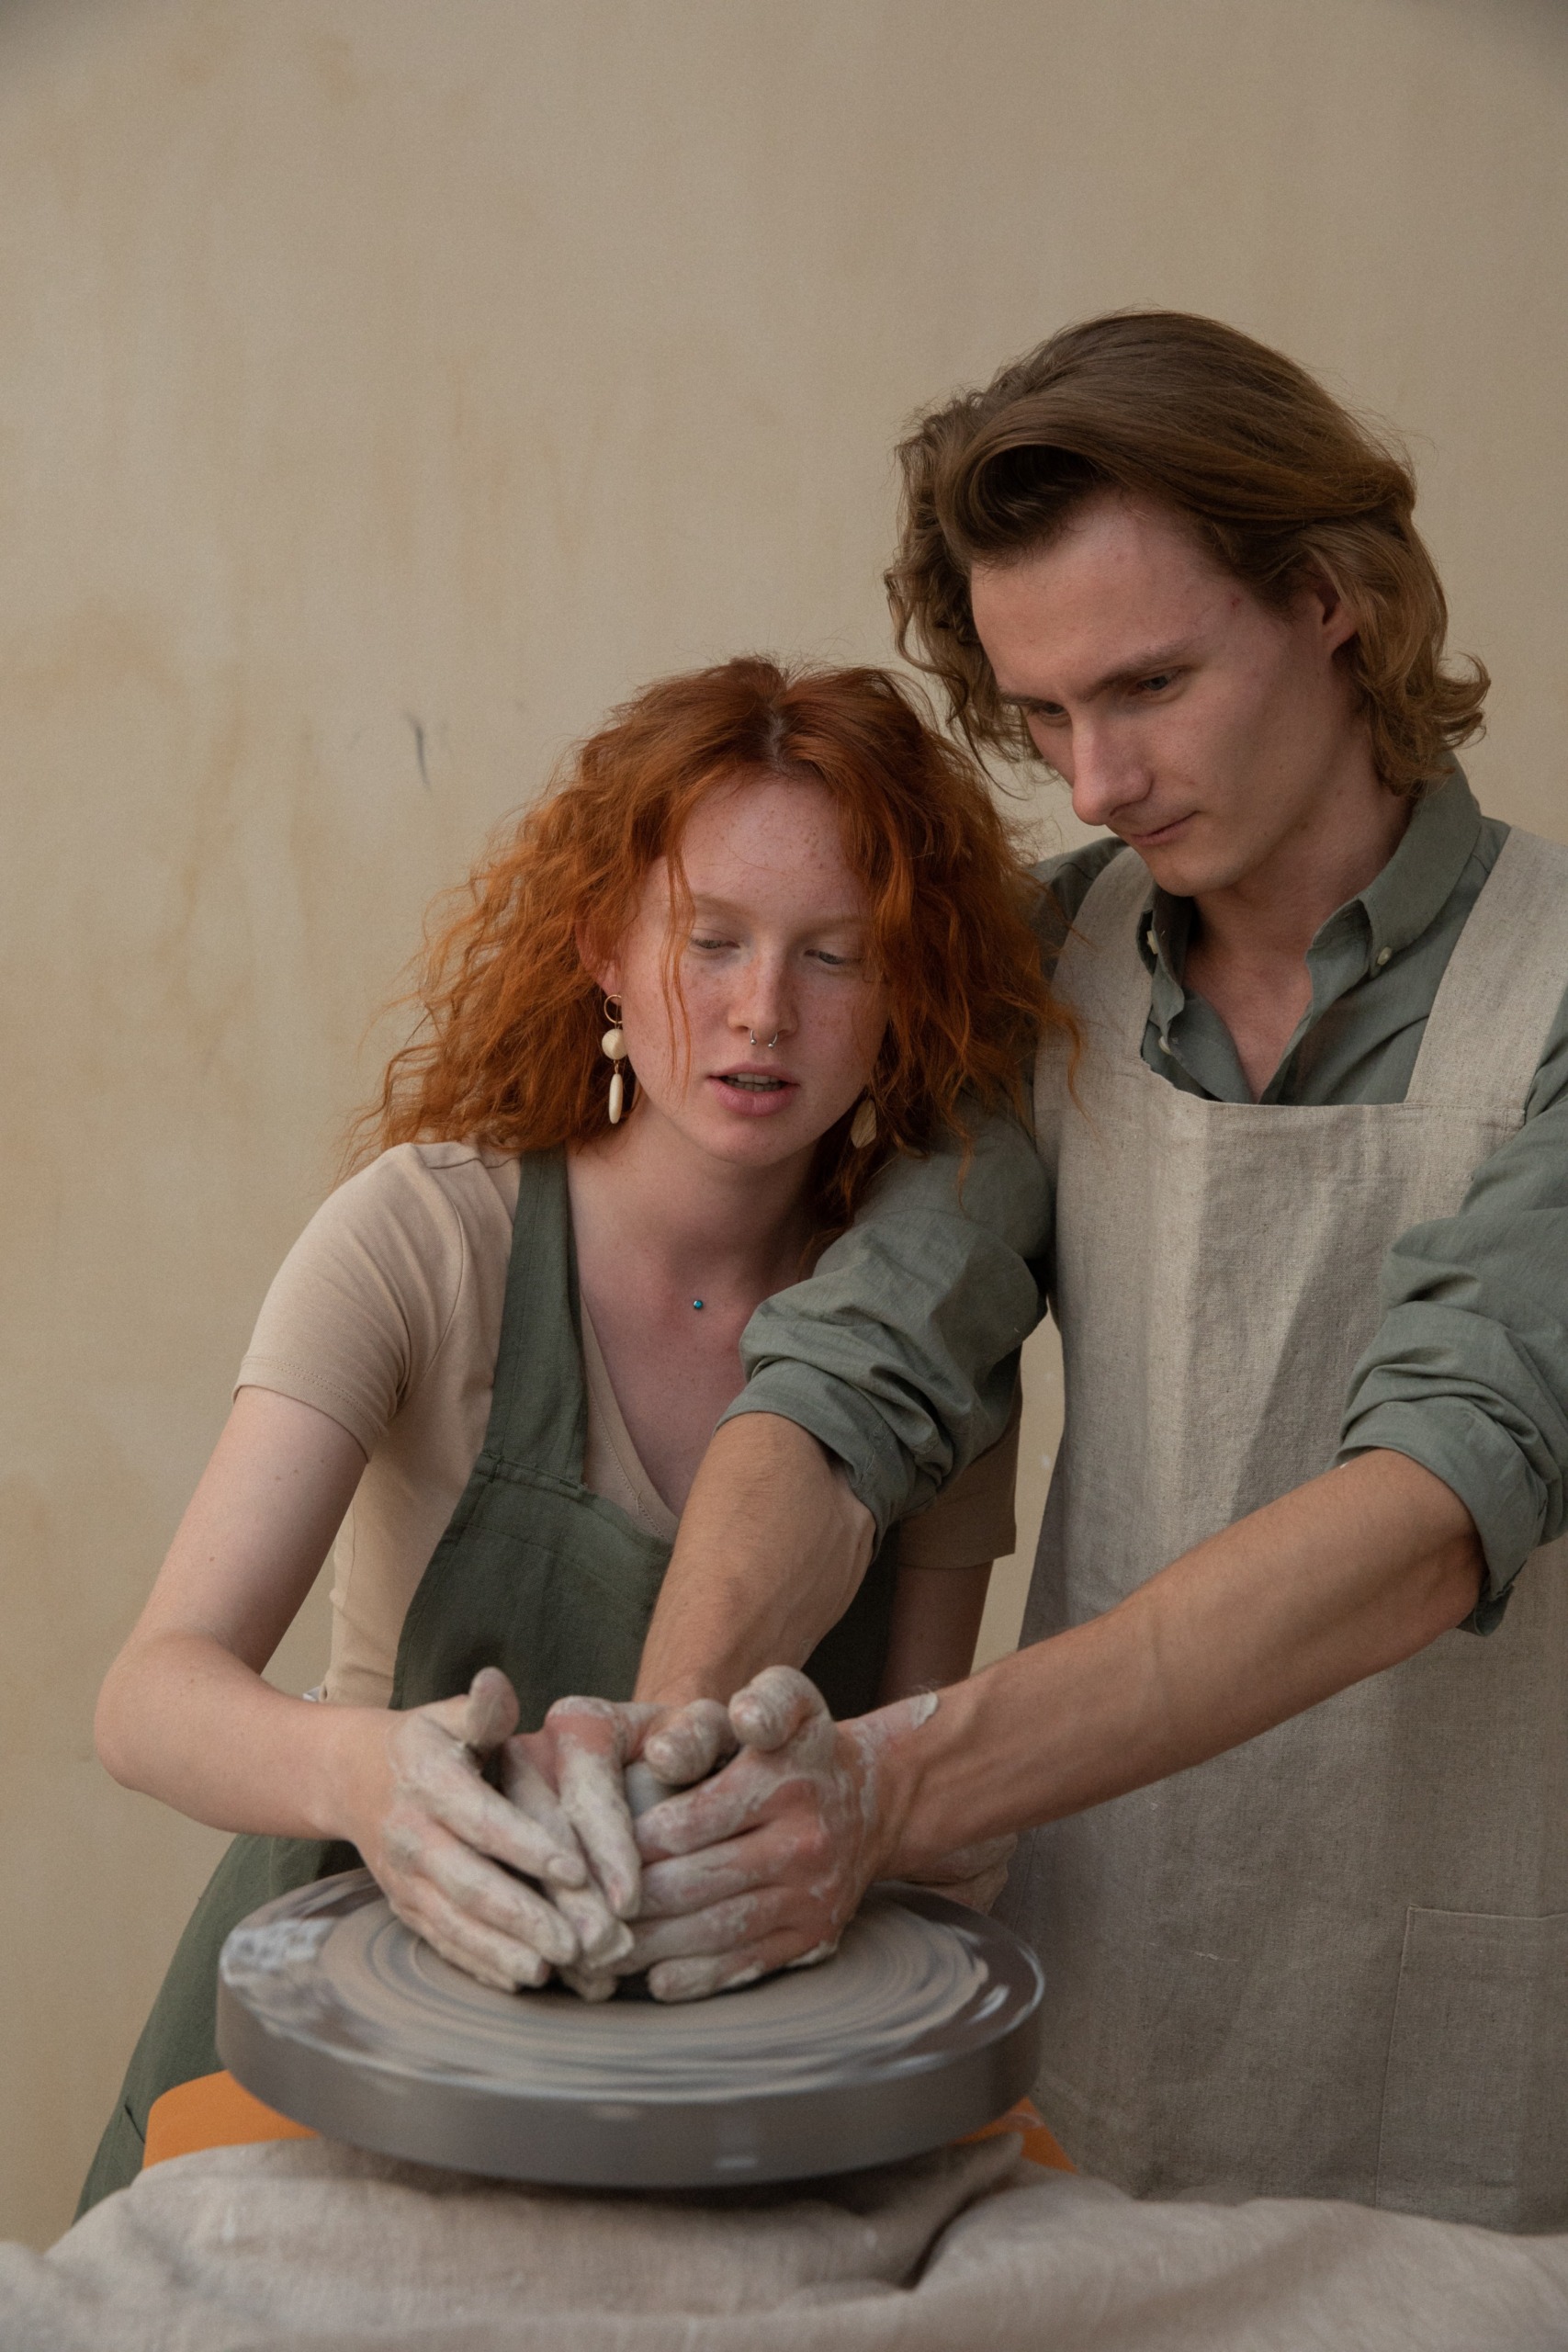 Couple making pottery together